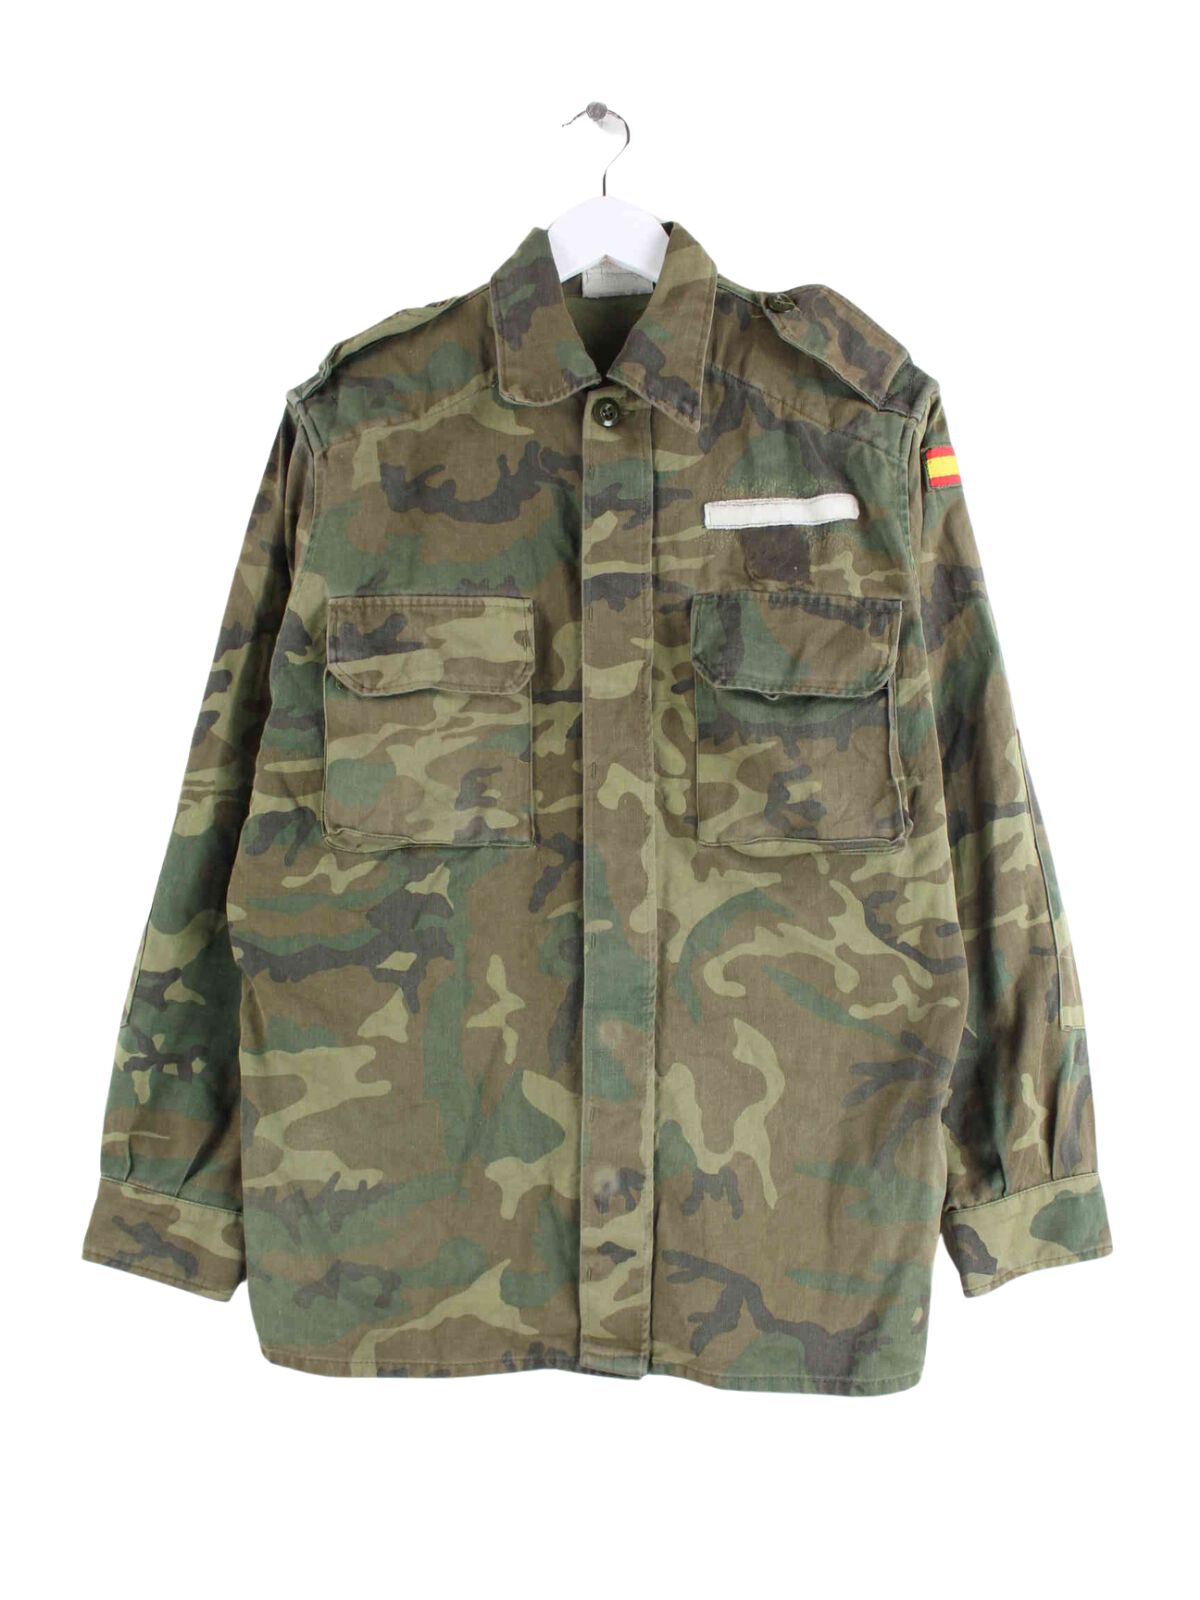 Vintage Camouflage Army Jacke Grün S (front image)